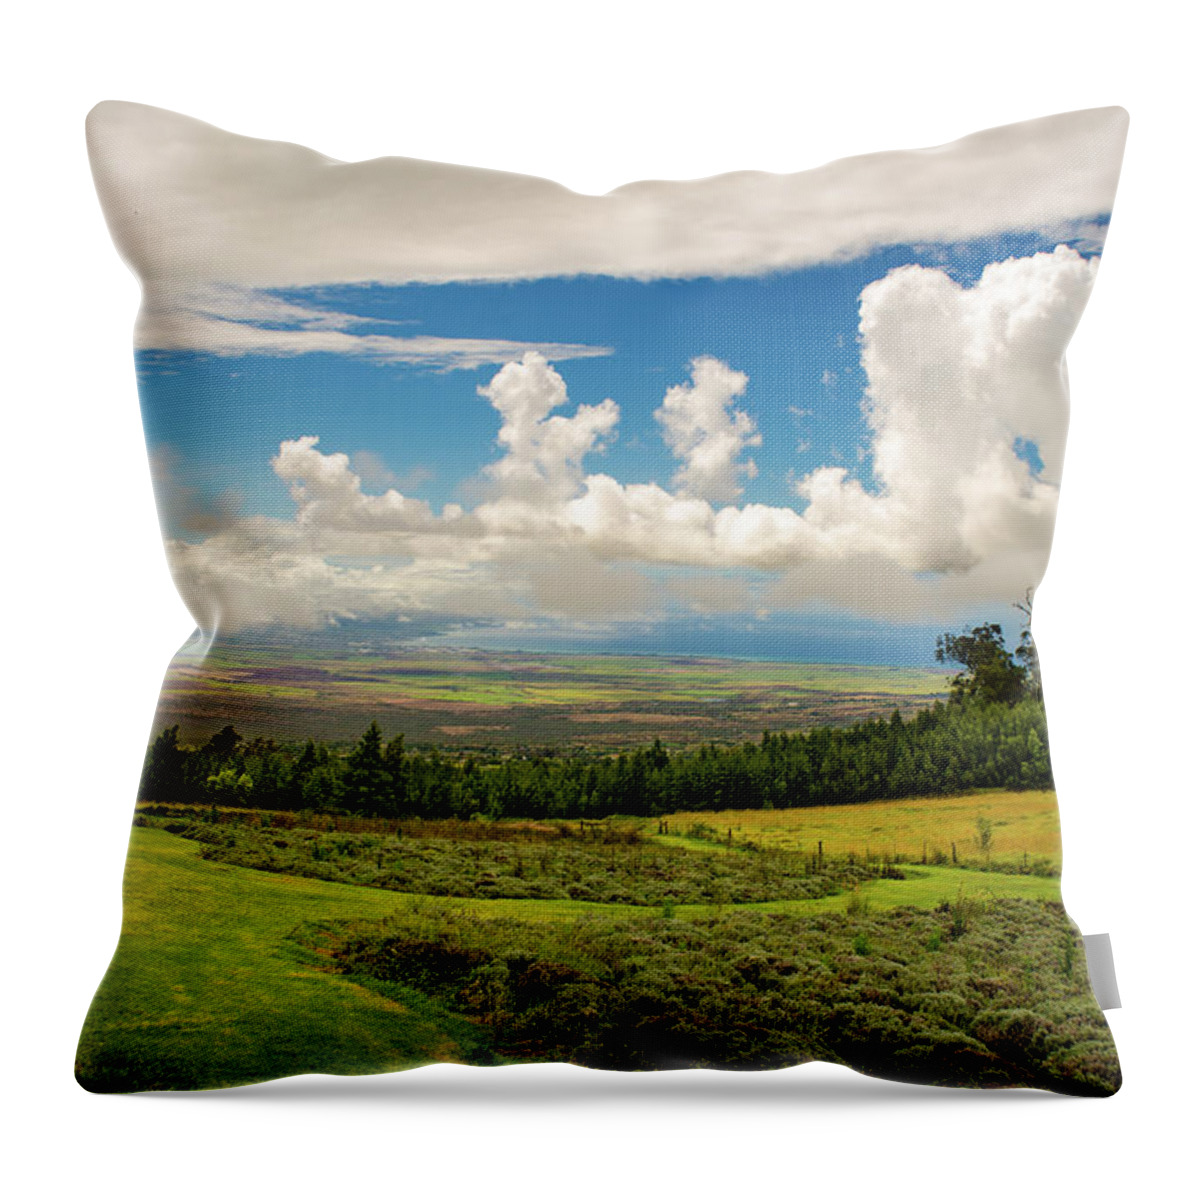 Alii Kula Lavender Throw Pillow featuring the photograph Alii Kula Lavender Farm by Jeff Phillippi